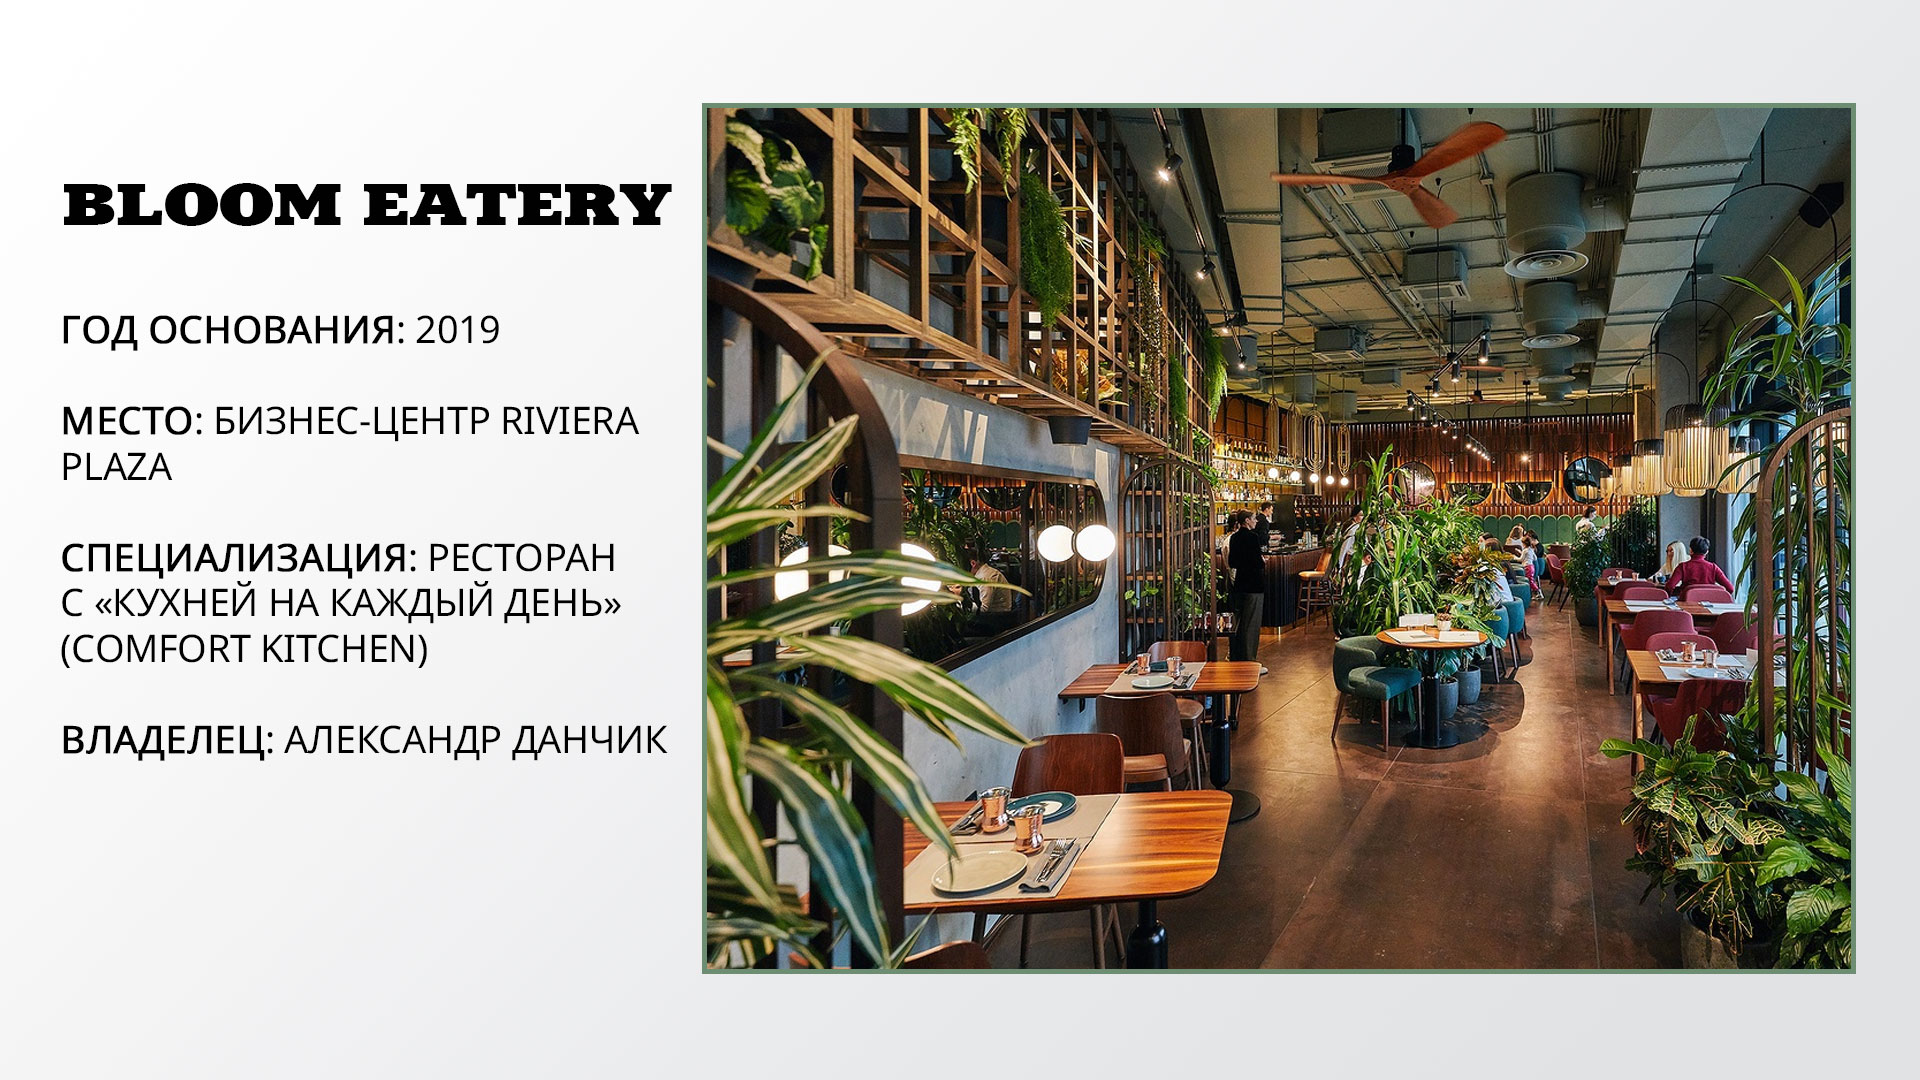 Bloom eatery